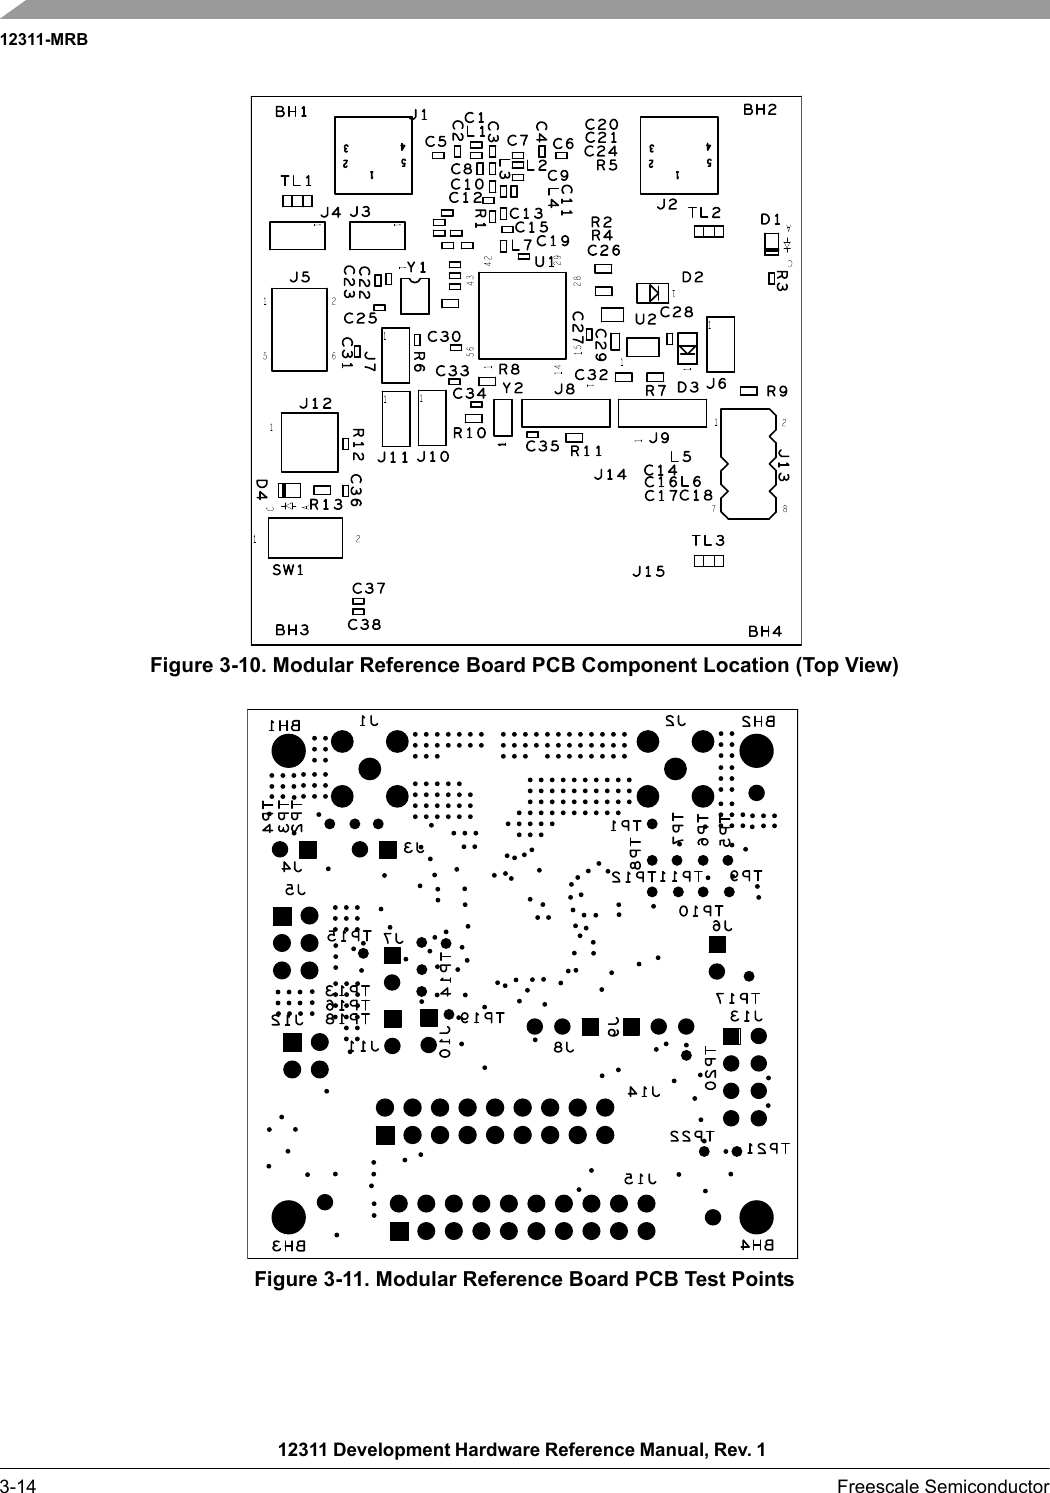 12311-MRB12311 Development Hardware Reference Manual, Rev. 1 3-14 Freescale SemiconductorFigure 3-10. Modular Reference Board PCB Component Location (Top View)Figure 3-11. Modular Reference Board PCB Test Points